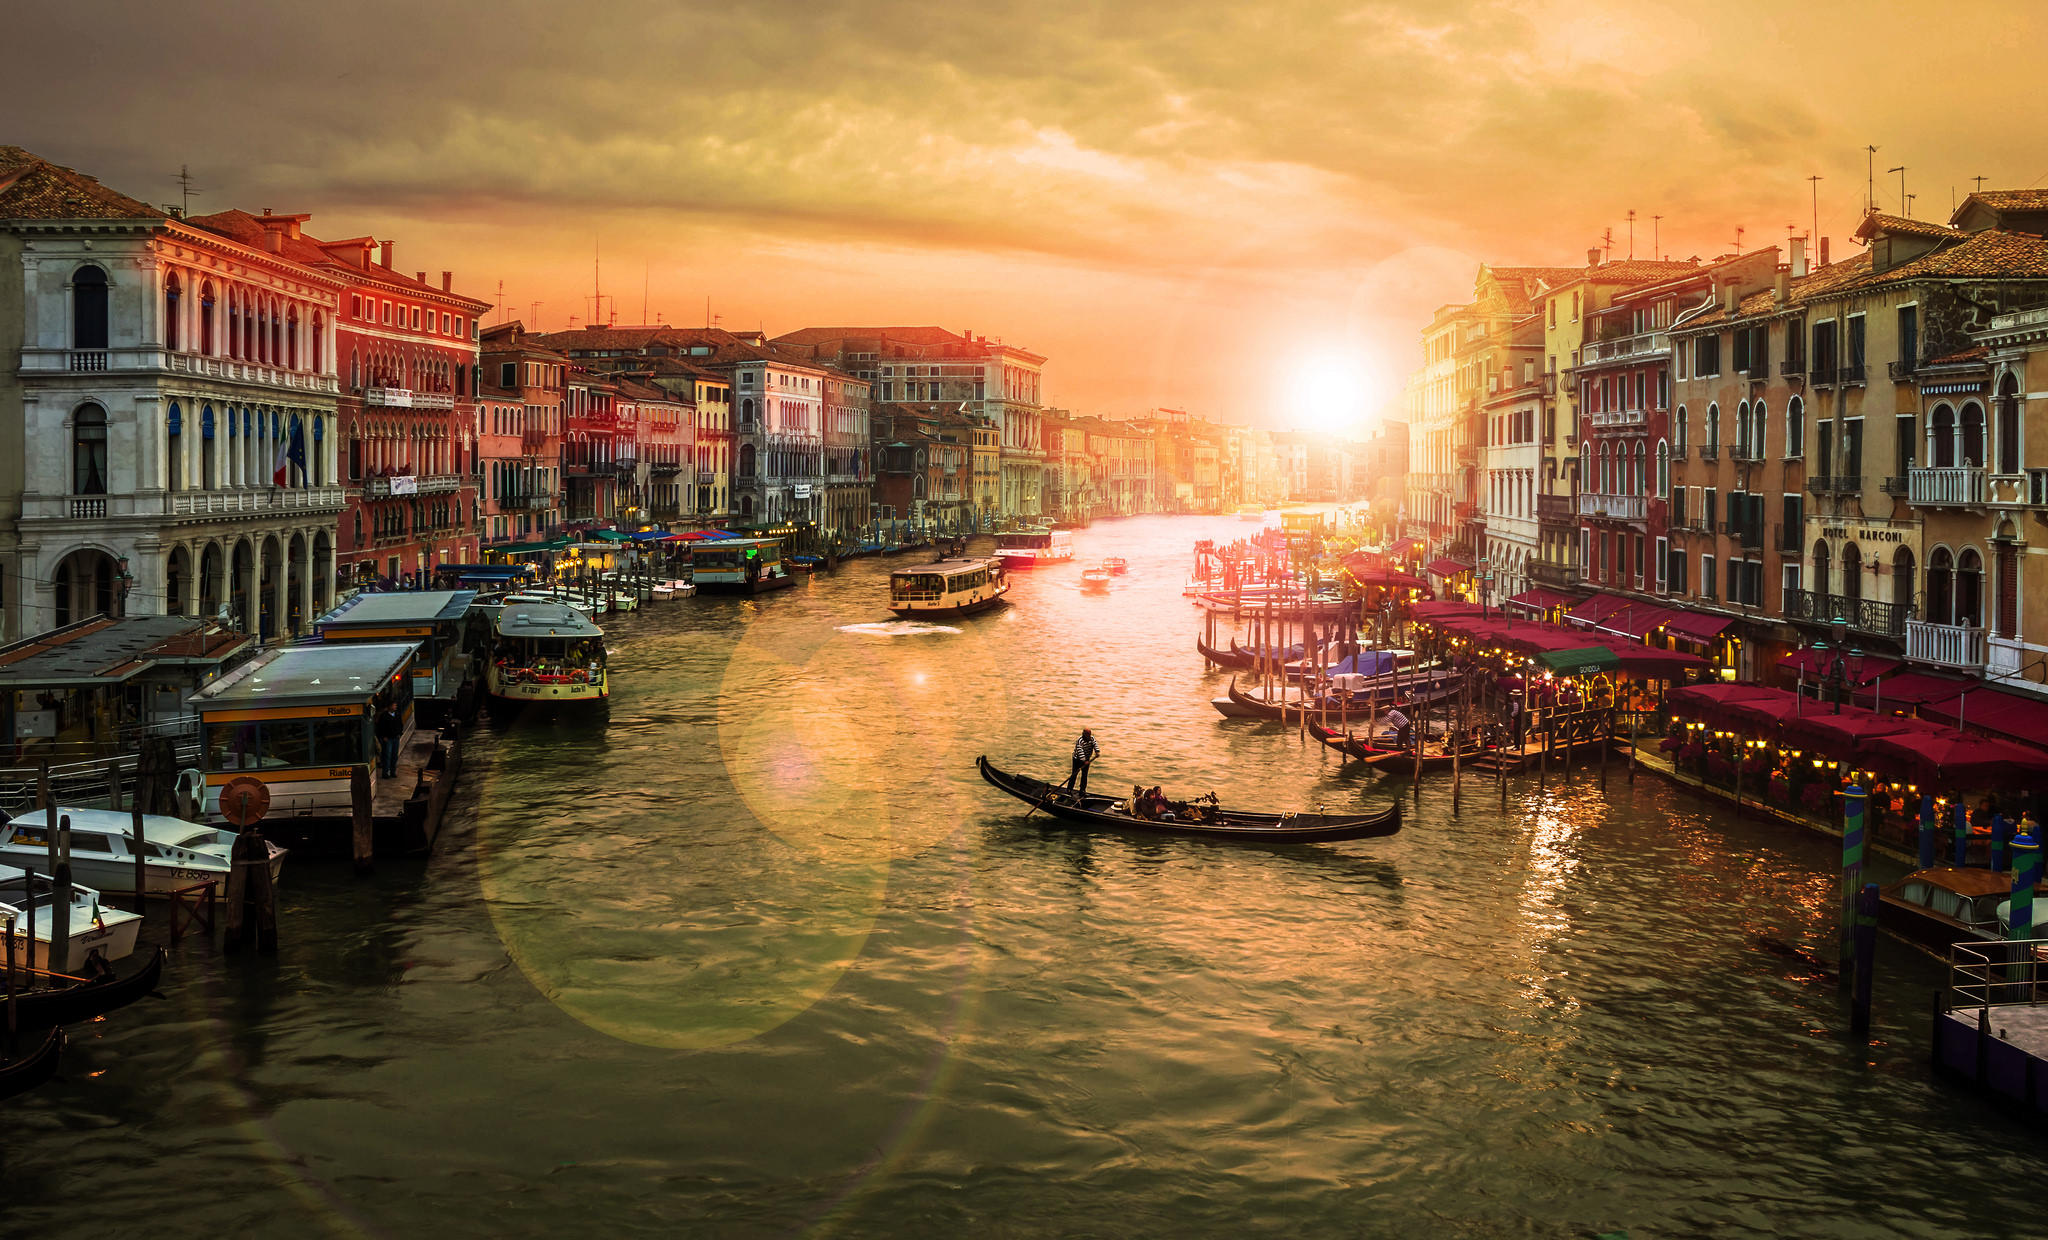 Wallpapers Venice Canal Cant on the desktop